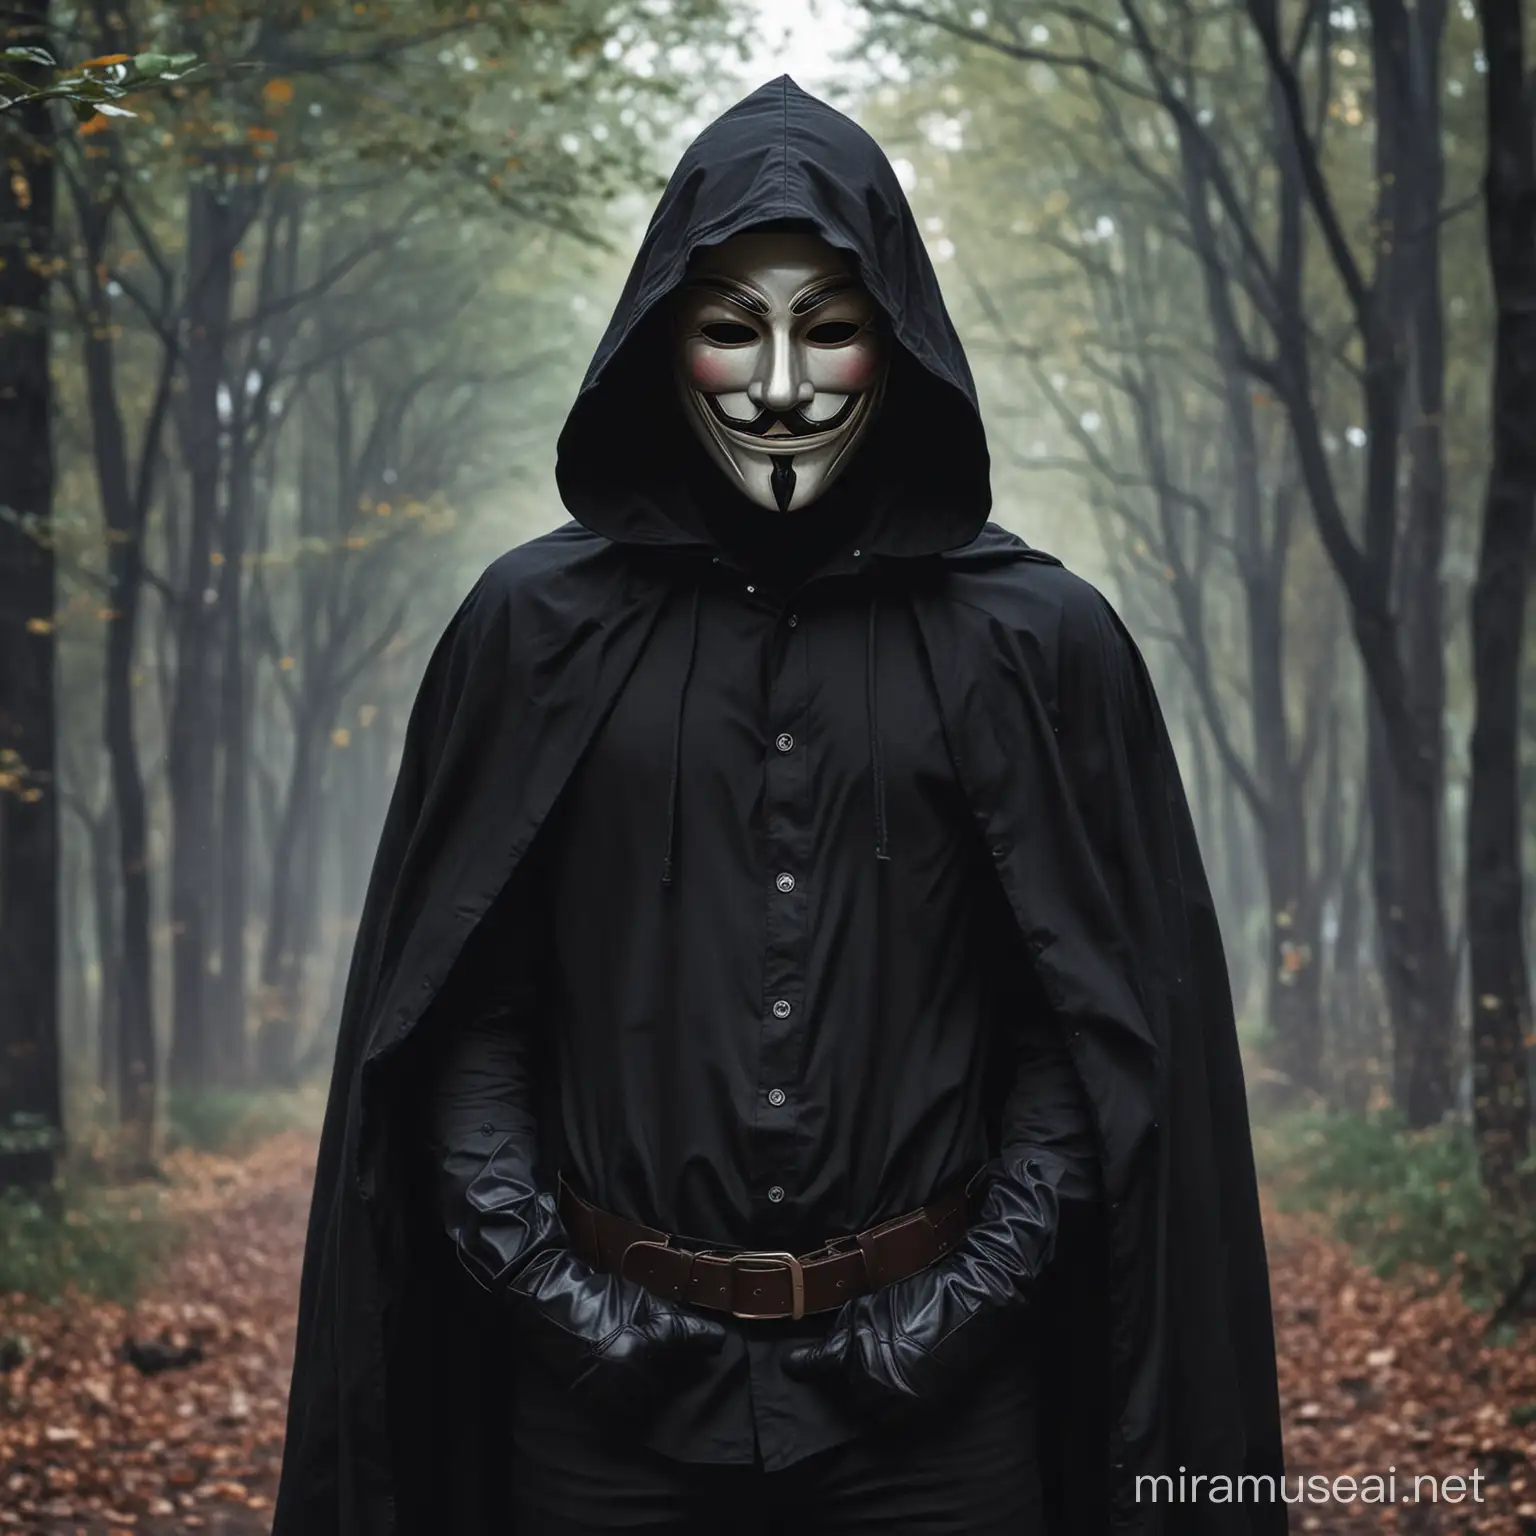 man,guy fawkes mask,hooded cape,black button down shirt,black gloves